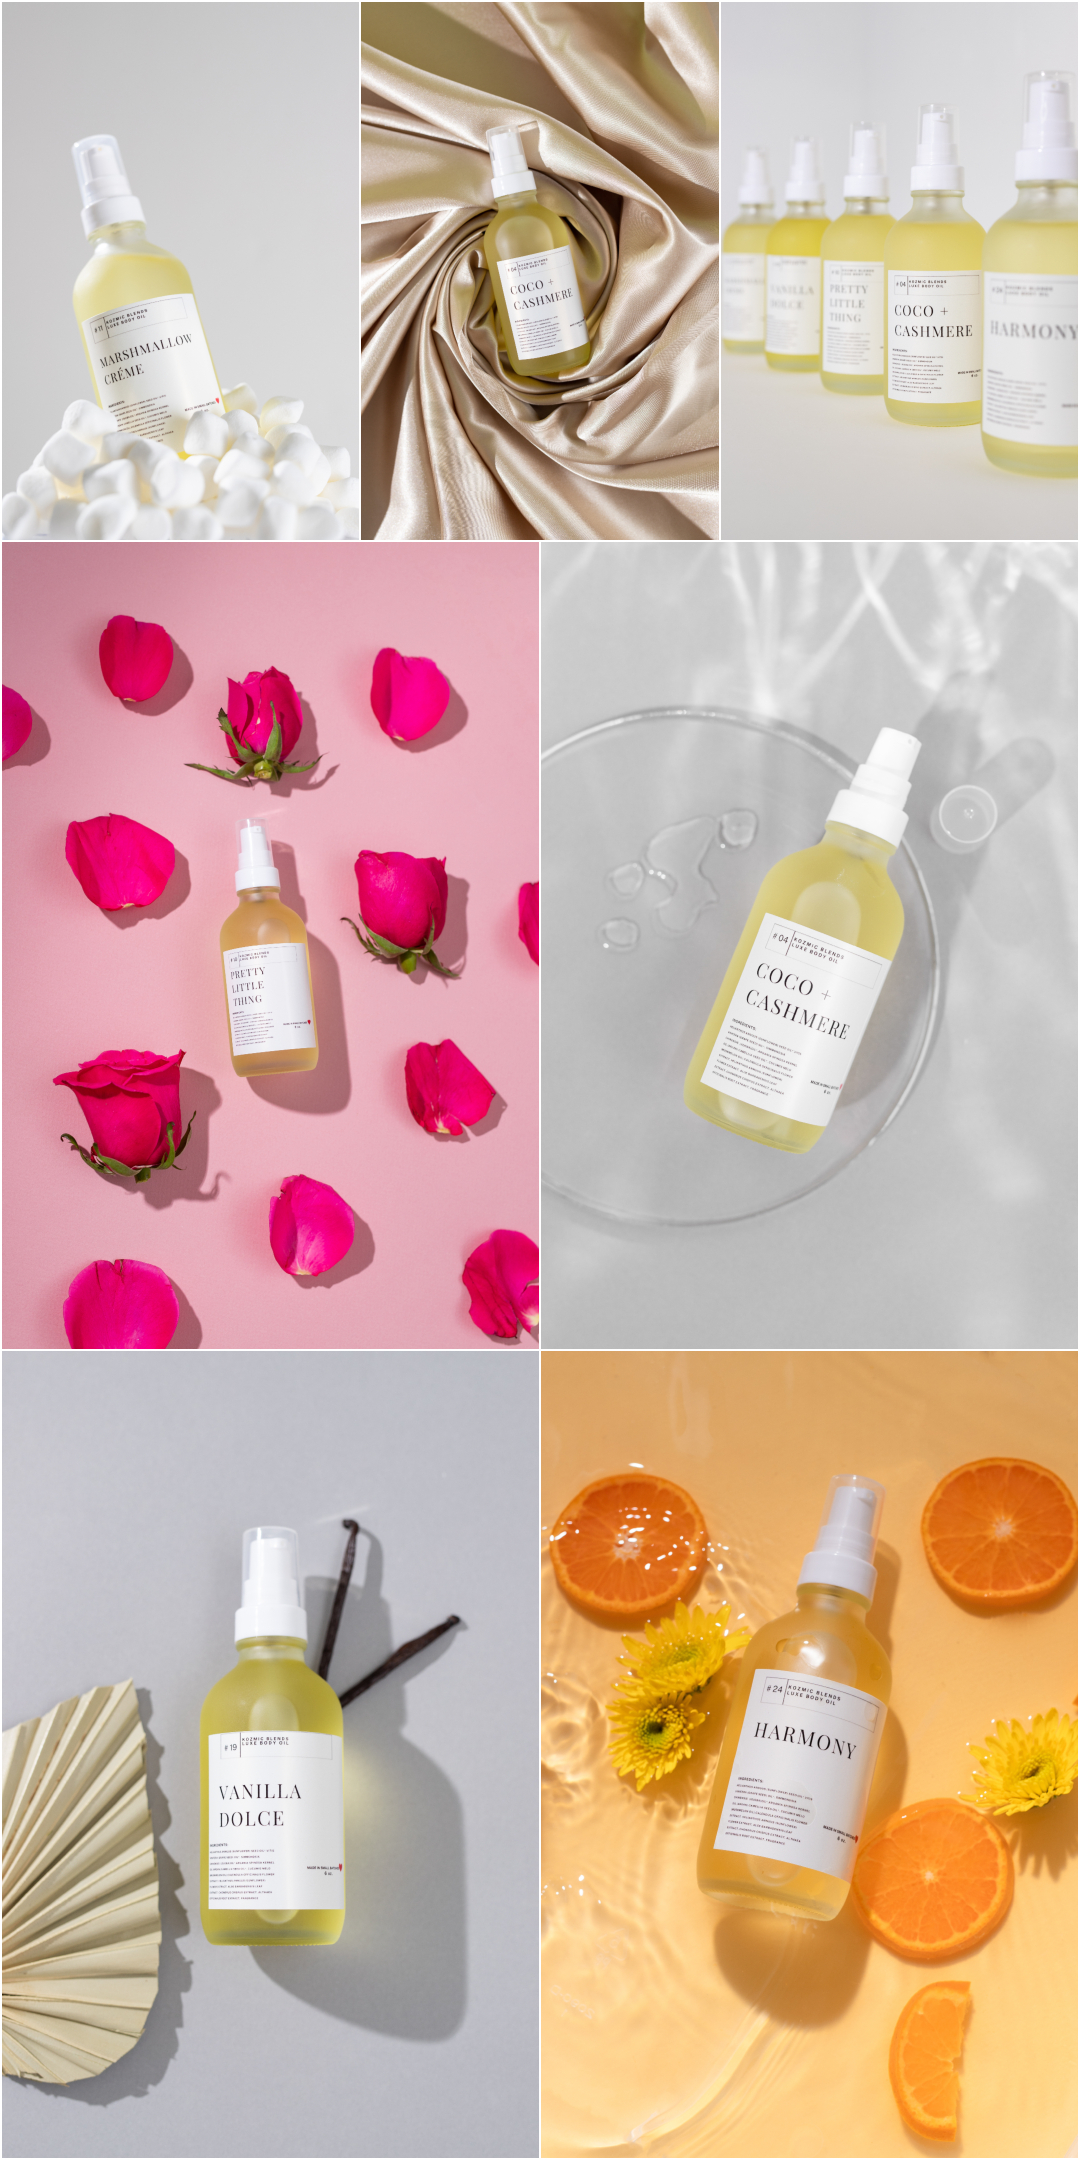 Body Oil Product Photographer - Beauty Product Photography